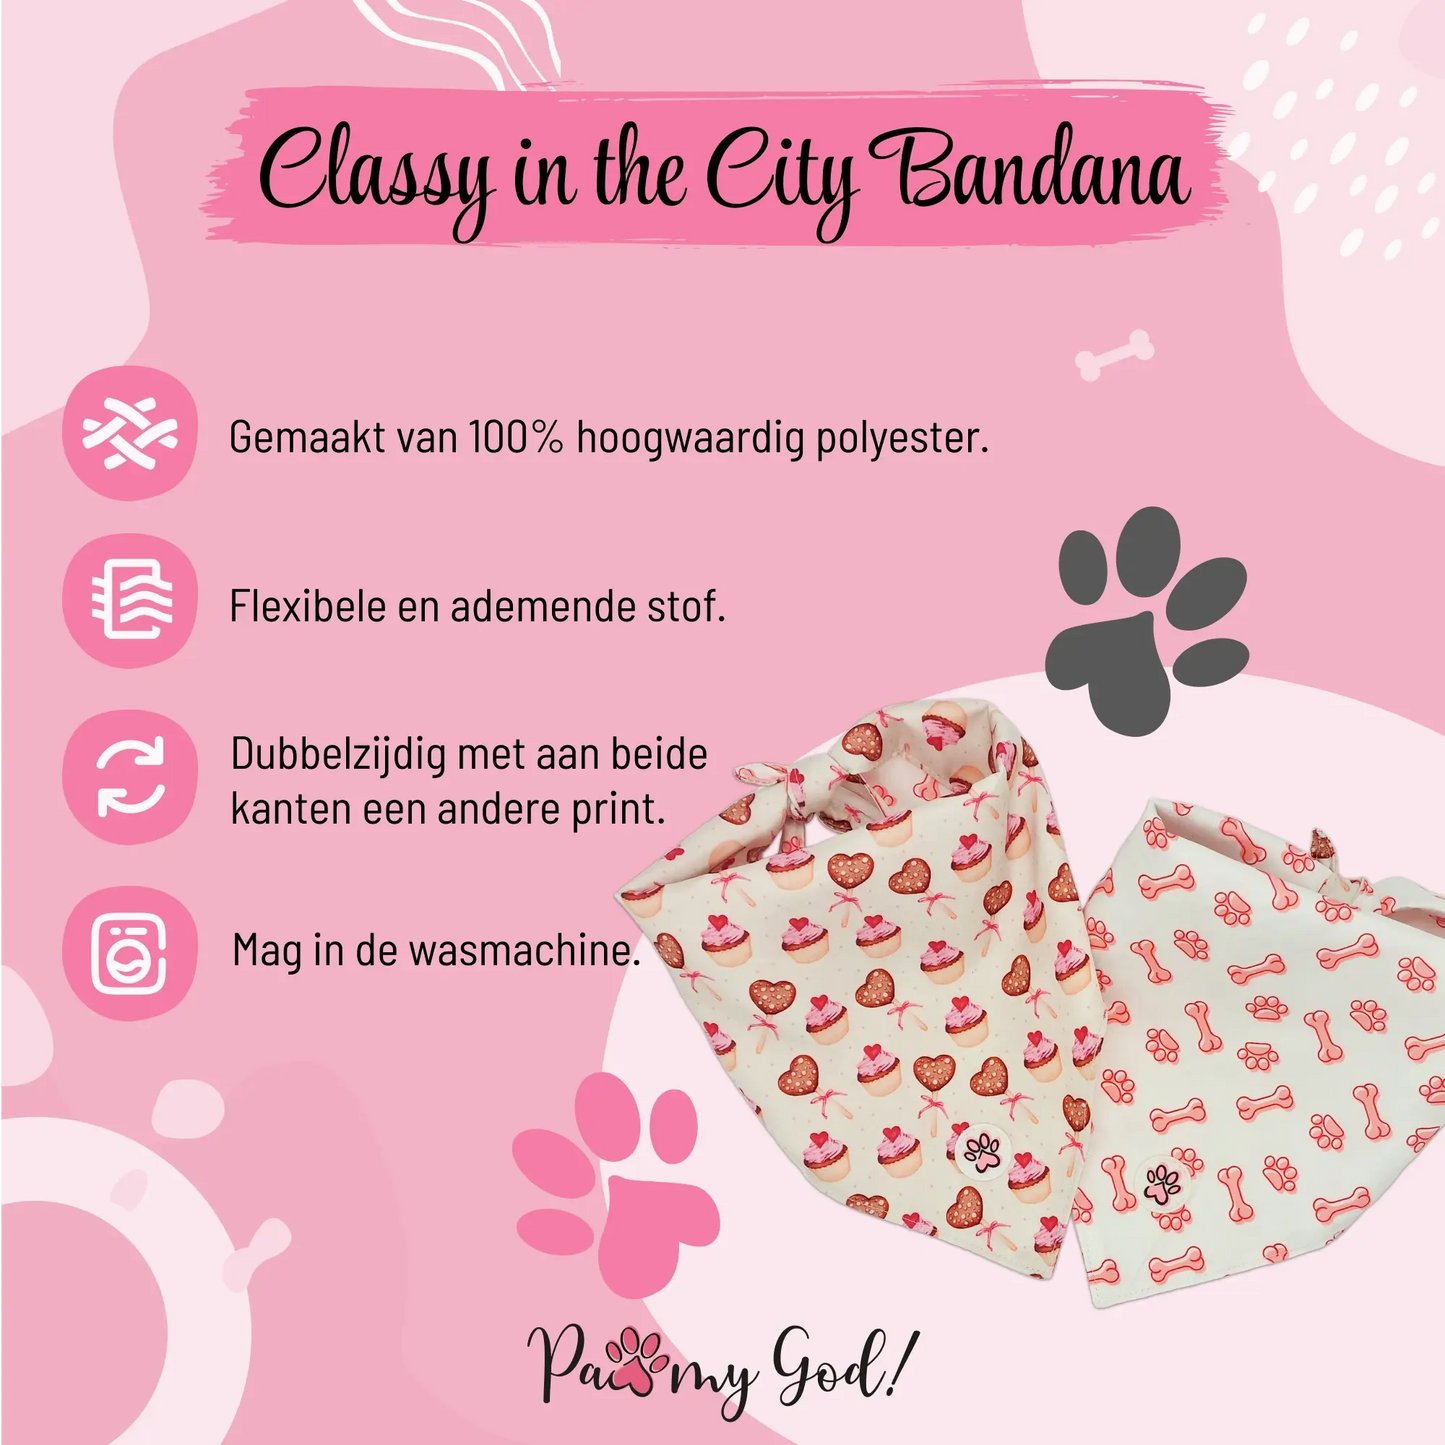 Classy in the City Bandana Features